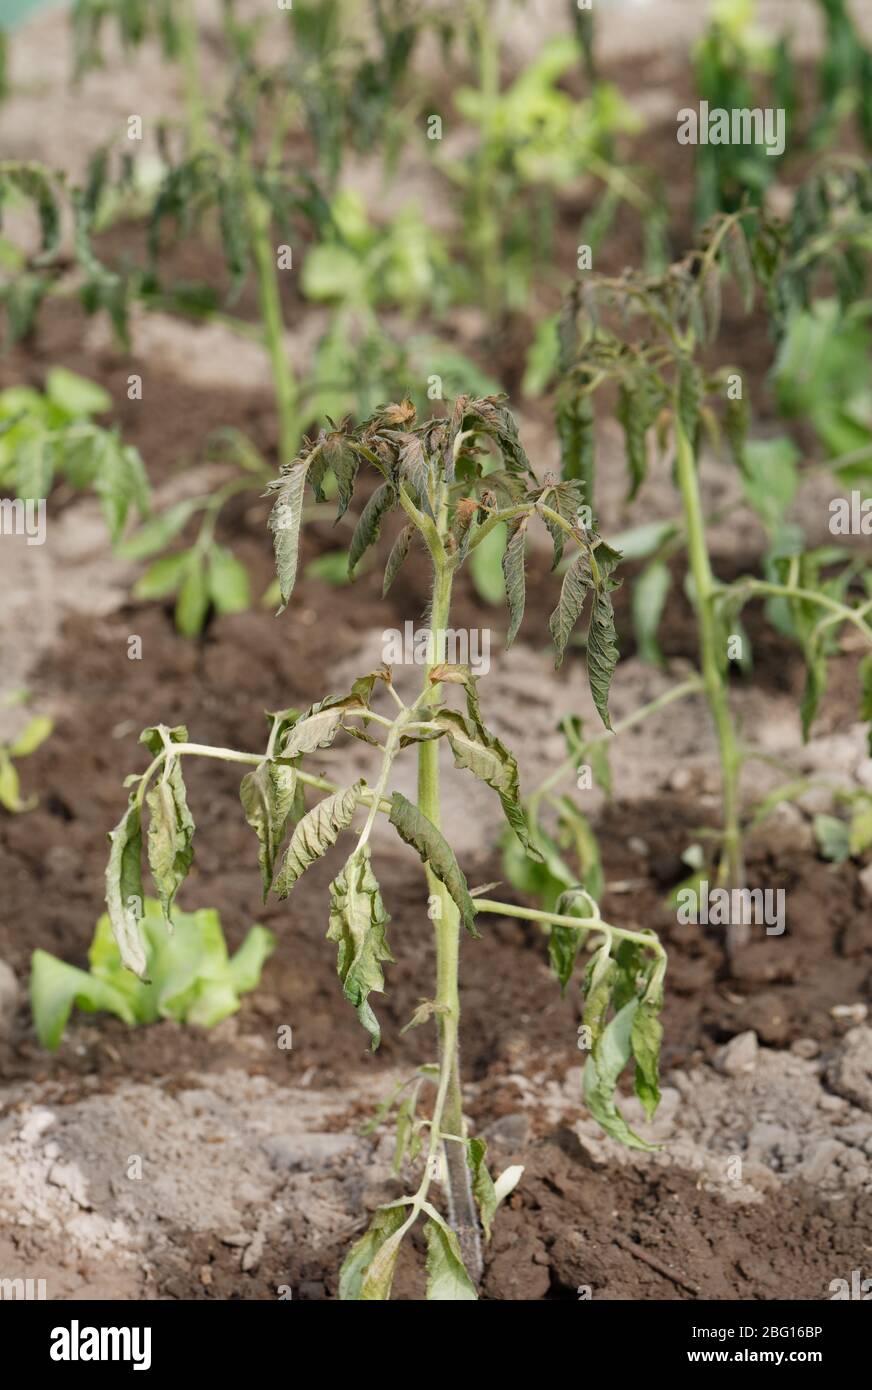 Withering tomato seedlings plant quality control with abnormal conditions of high temperatures and lack of water. Home gardening greenhouse. Stock Photo